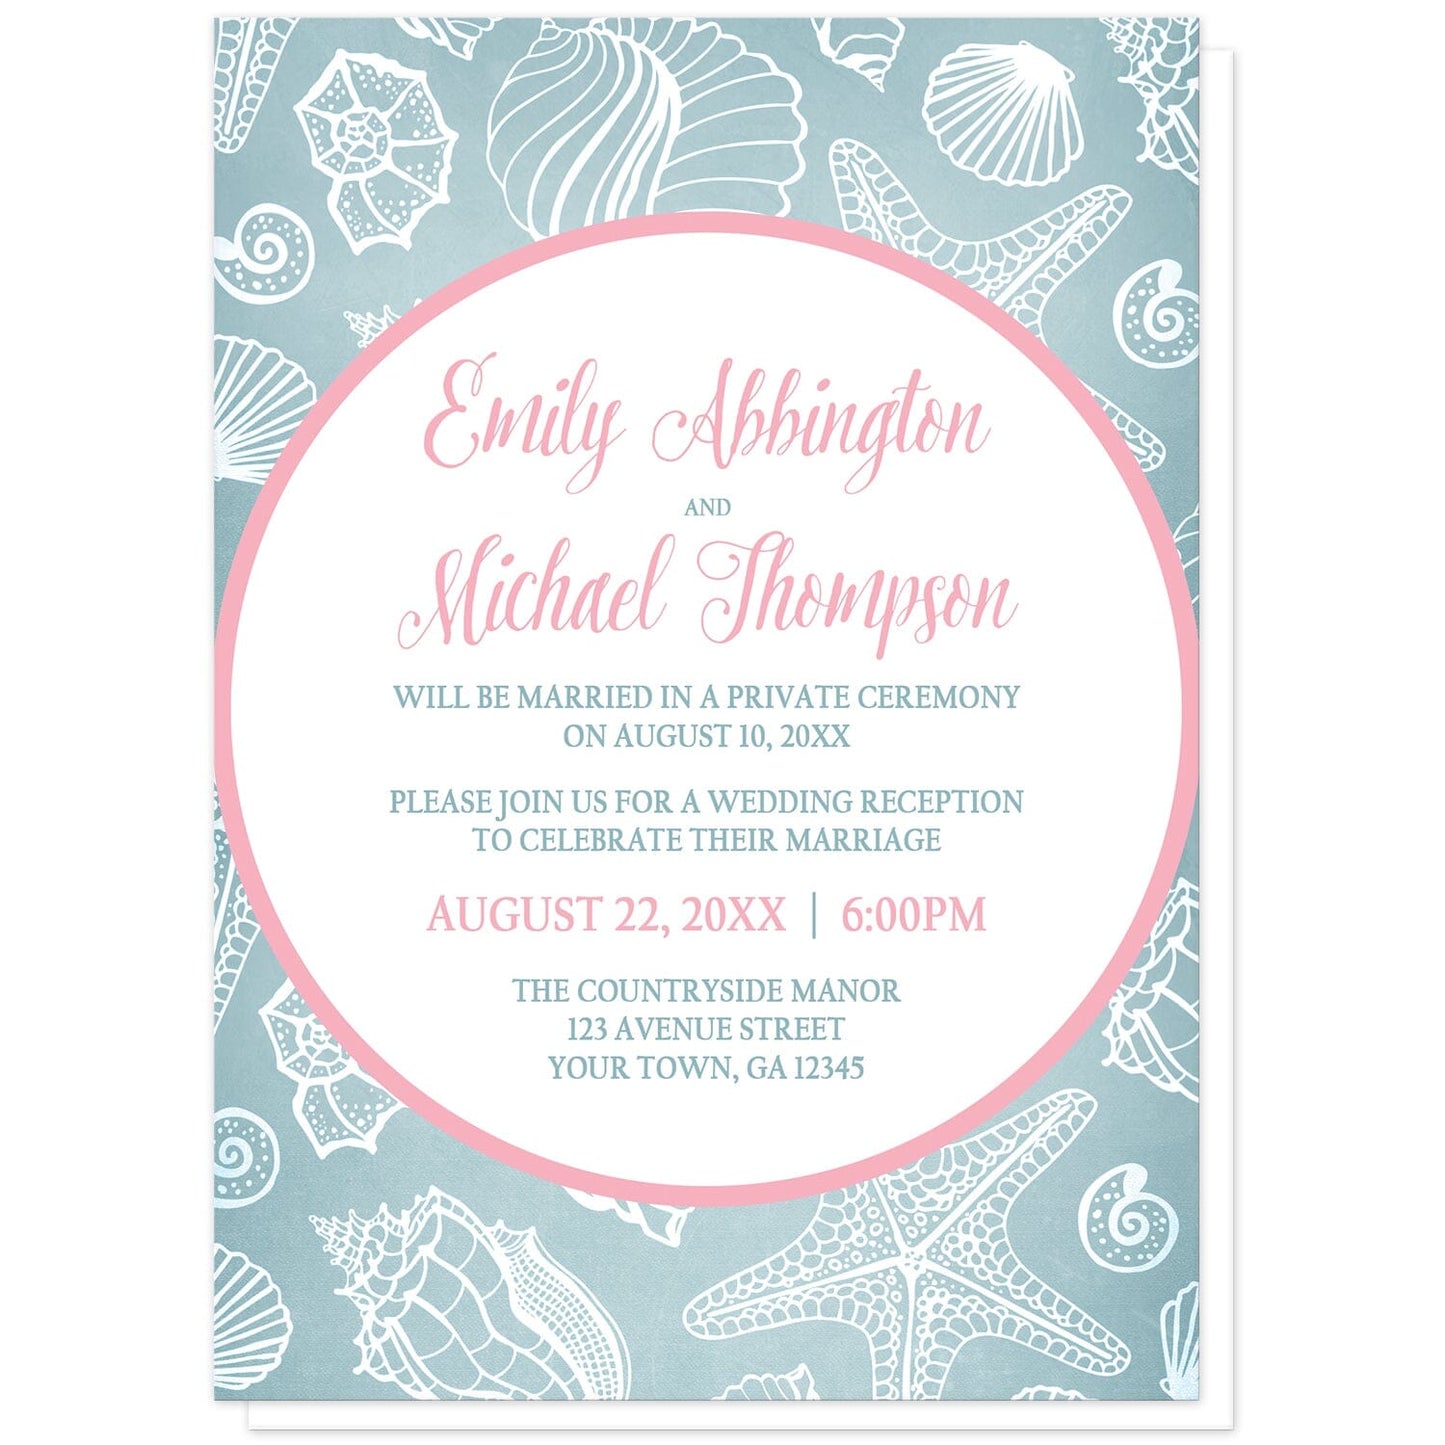 Blue Seashell Pink Beach Reception Only Invitations at Artistically Invited. Blue seashell pink beach reception only invitations designed with your personalized post-wedding reception details custom printed in pink and blue, inside a pink outlined white circle, over a blue and white seashell pattern background. 